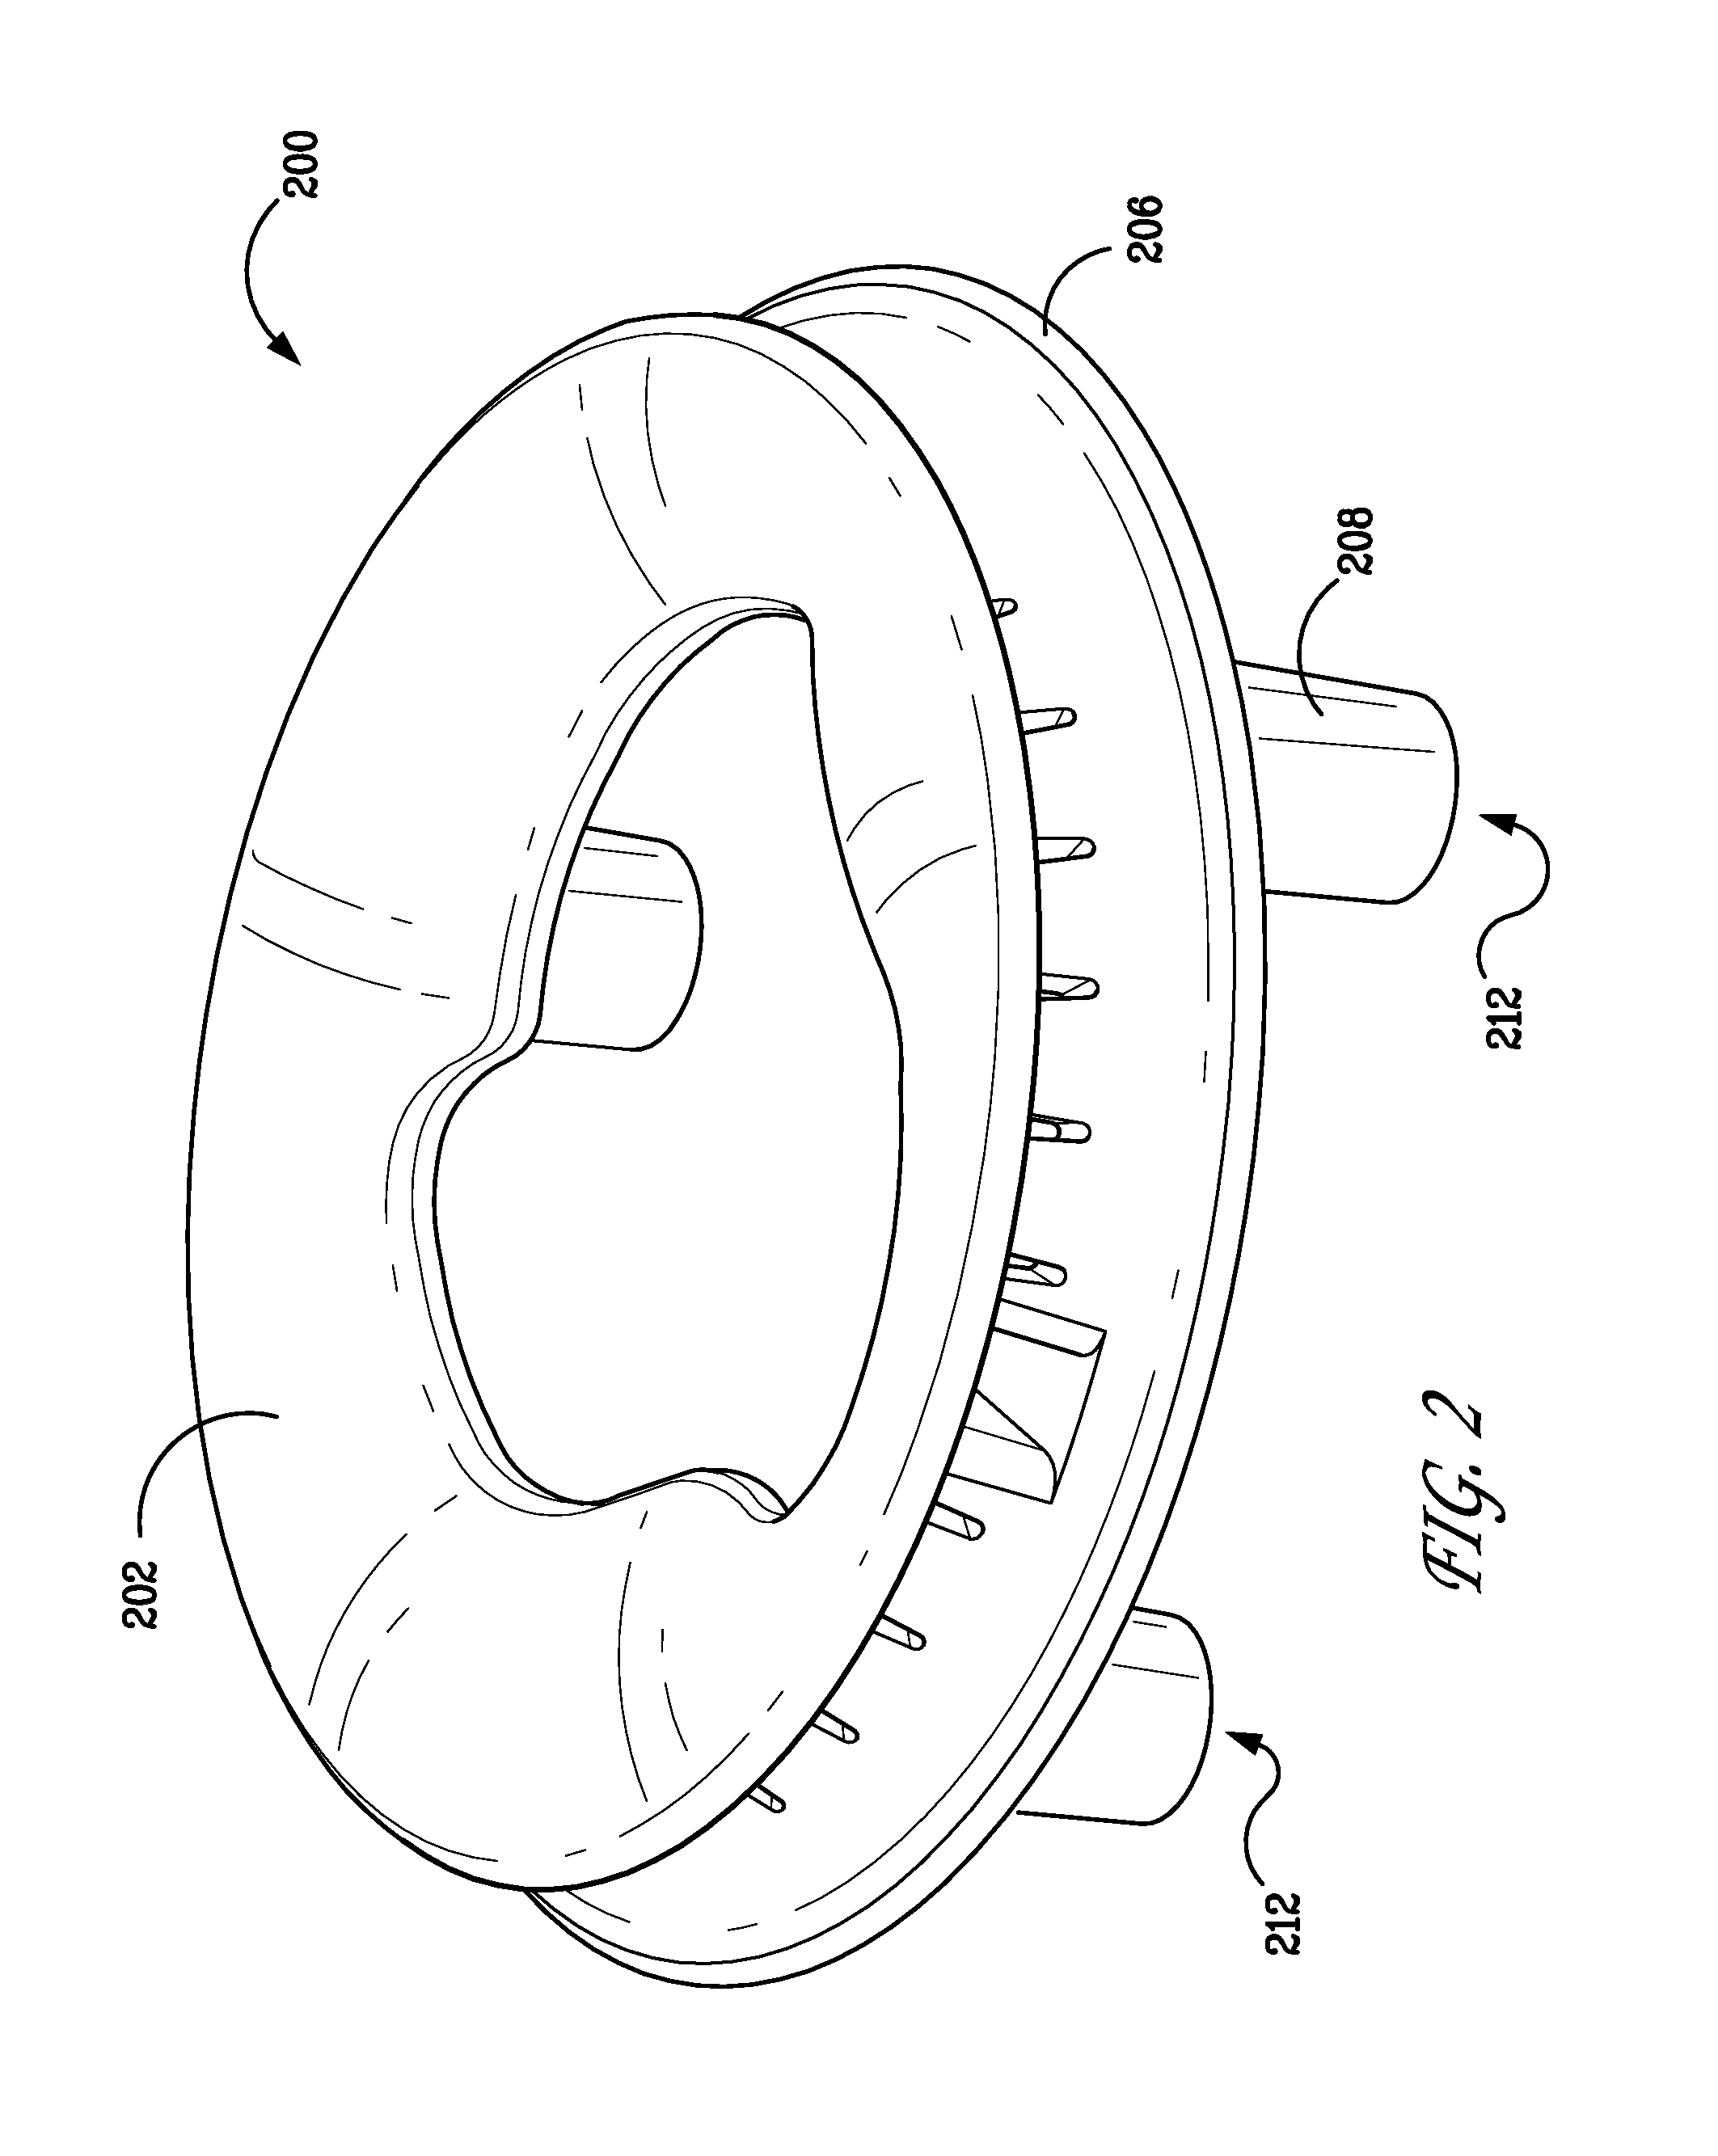 Device and method for a gas burner